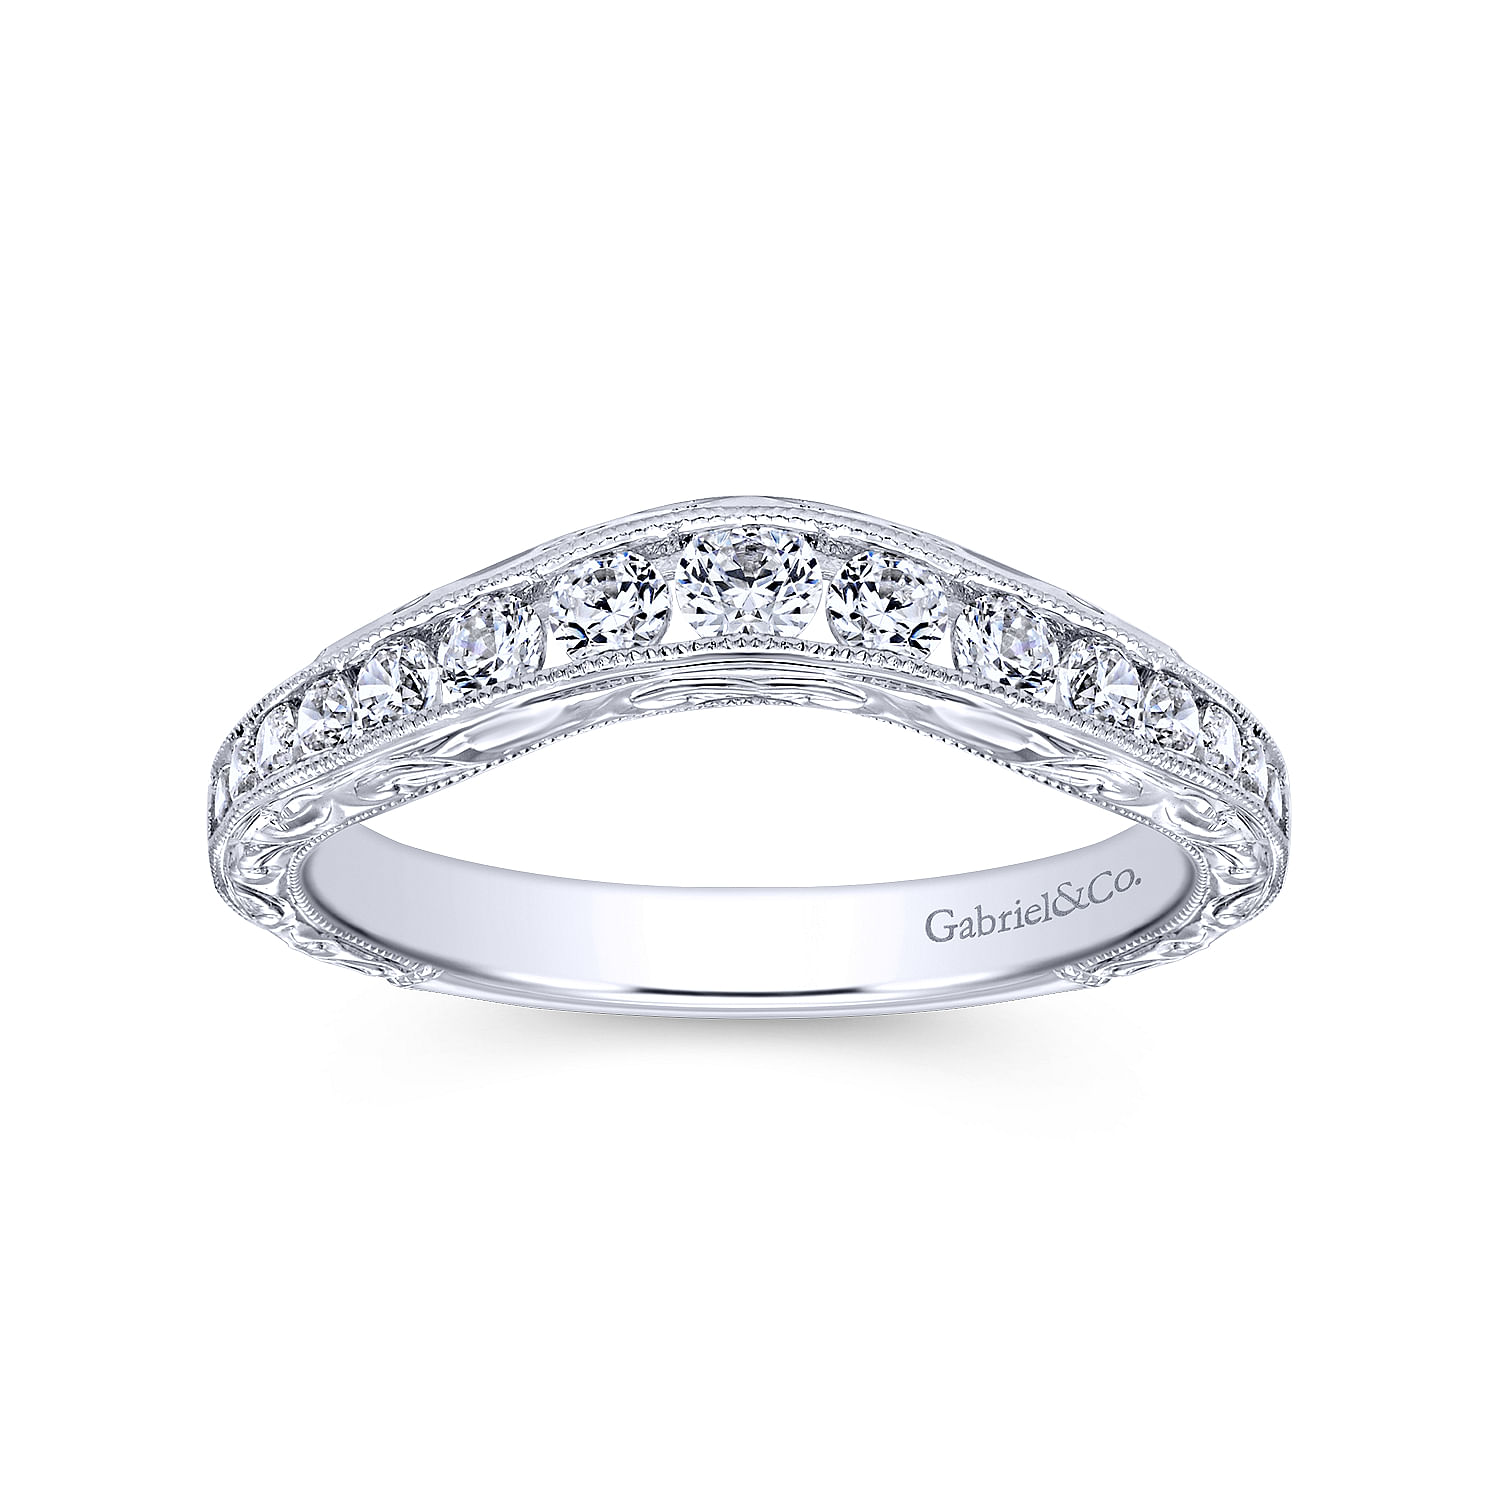 Vintage Inspired 14K White Gold Micro Pavé Curved and Channel Set Diamond Wedding Band with Engraving